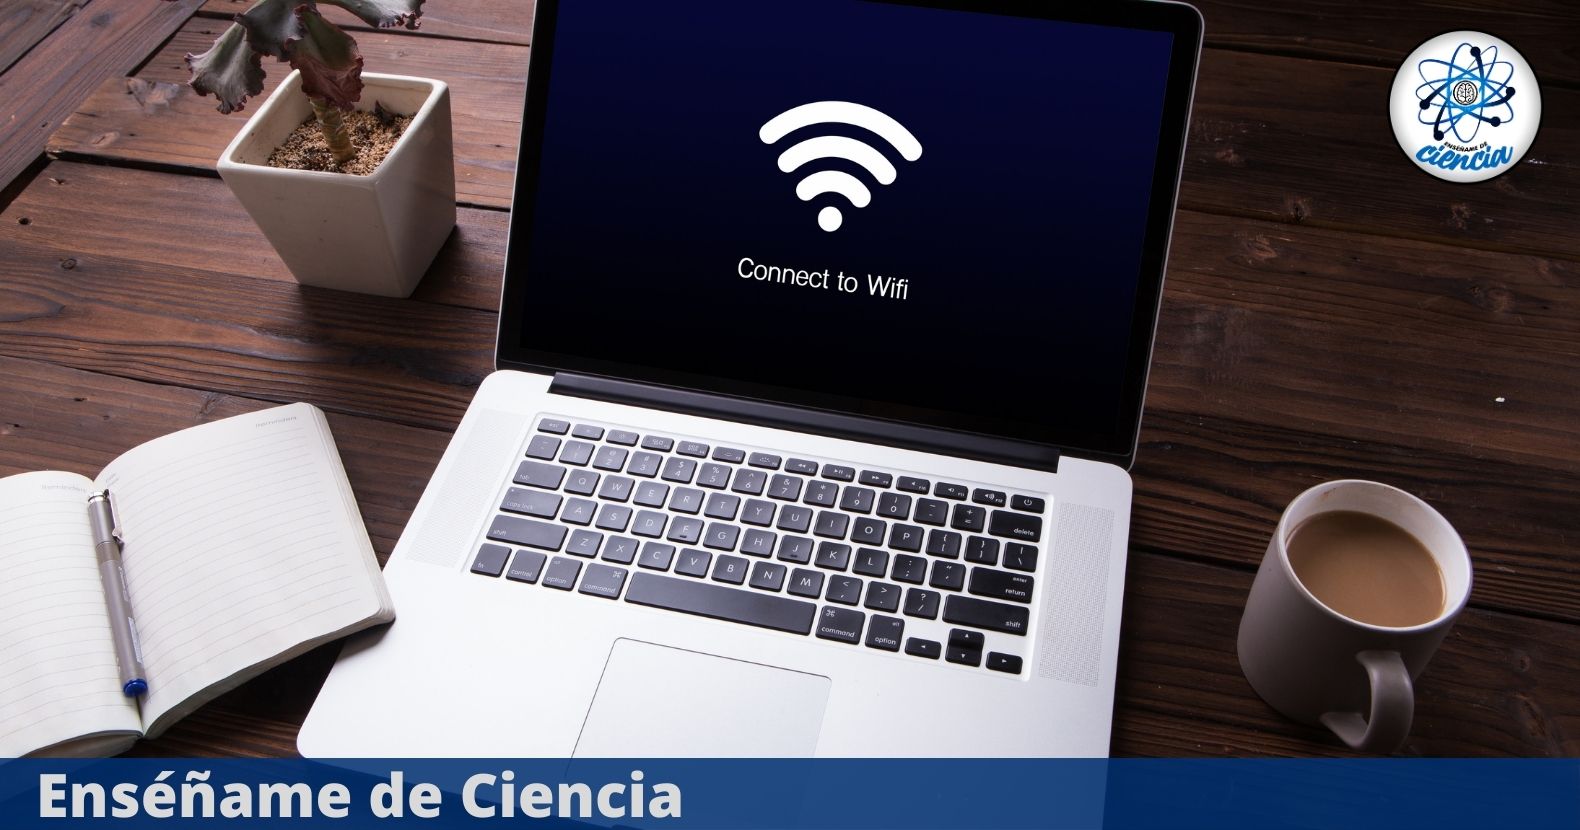 This is the infallible trick to improve your computer’s WiFi connection with a single device – Enseñame de Ciencia